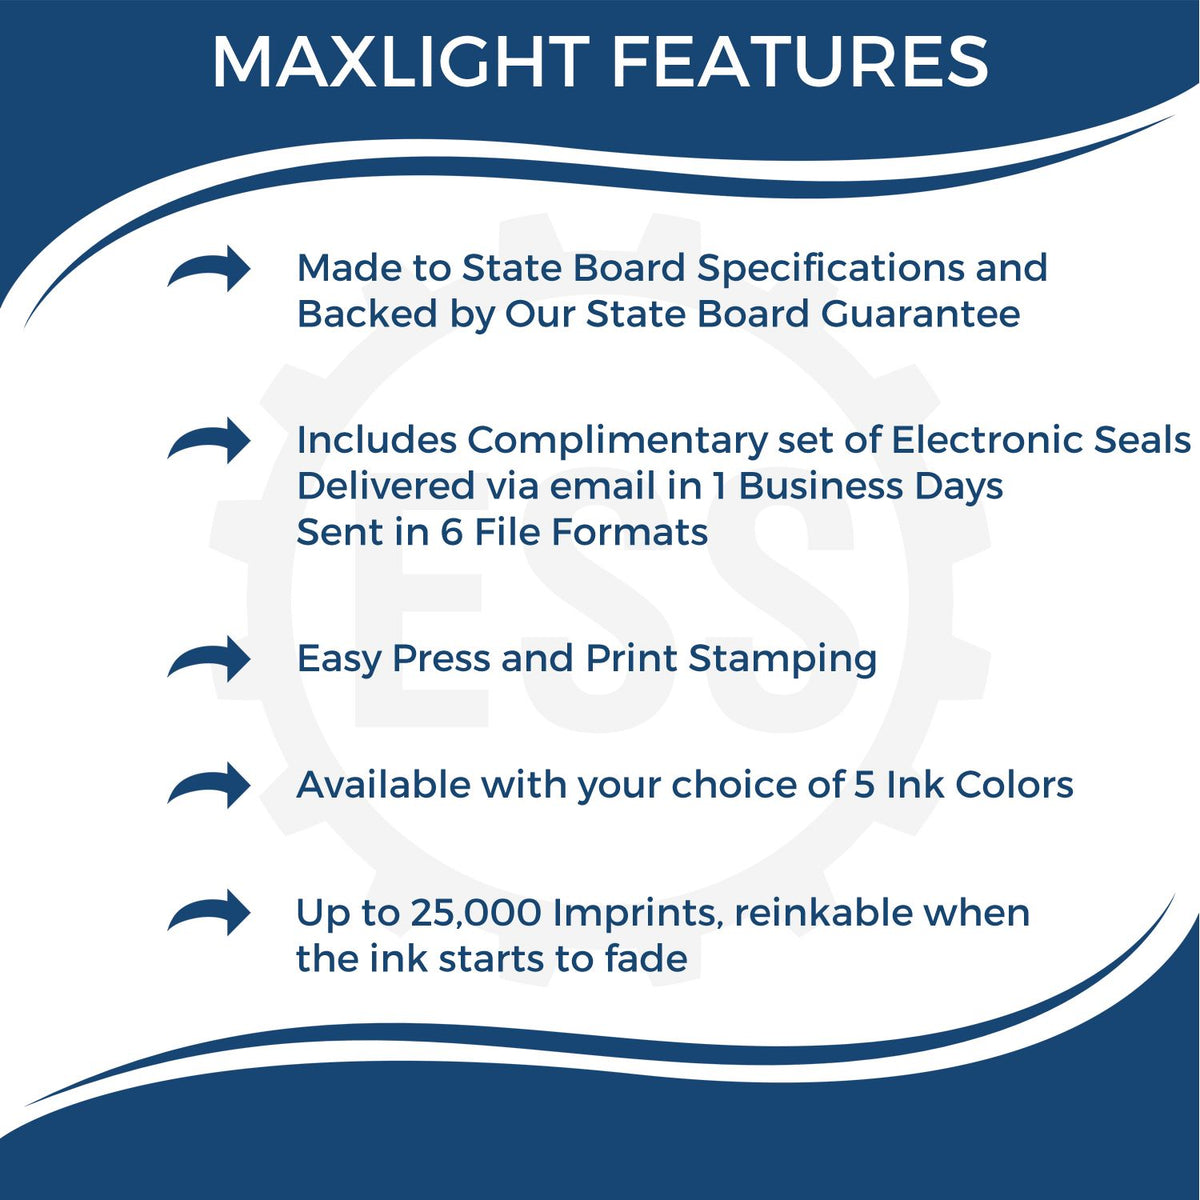 A picture of an infographic highlighting the selling points for the Premium MaxLight Pre-Inked South Carolina Geology Stamp